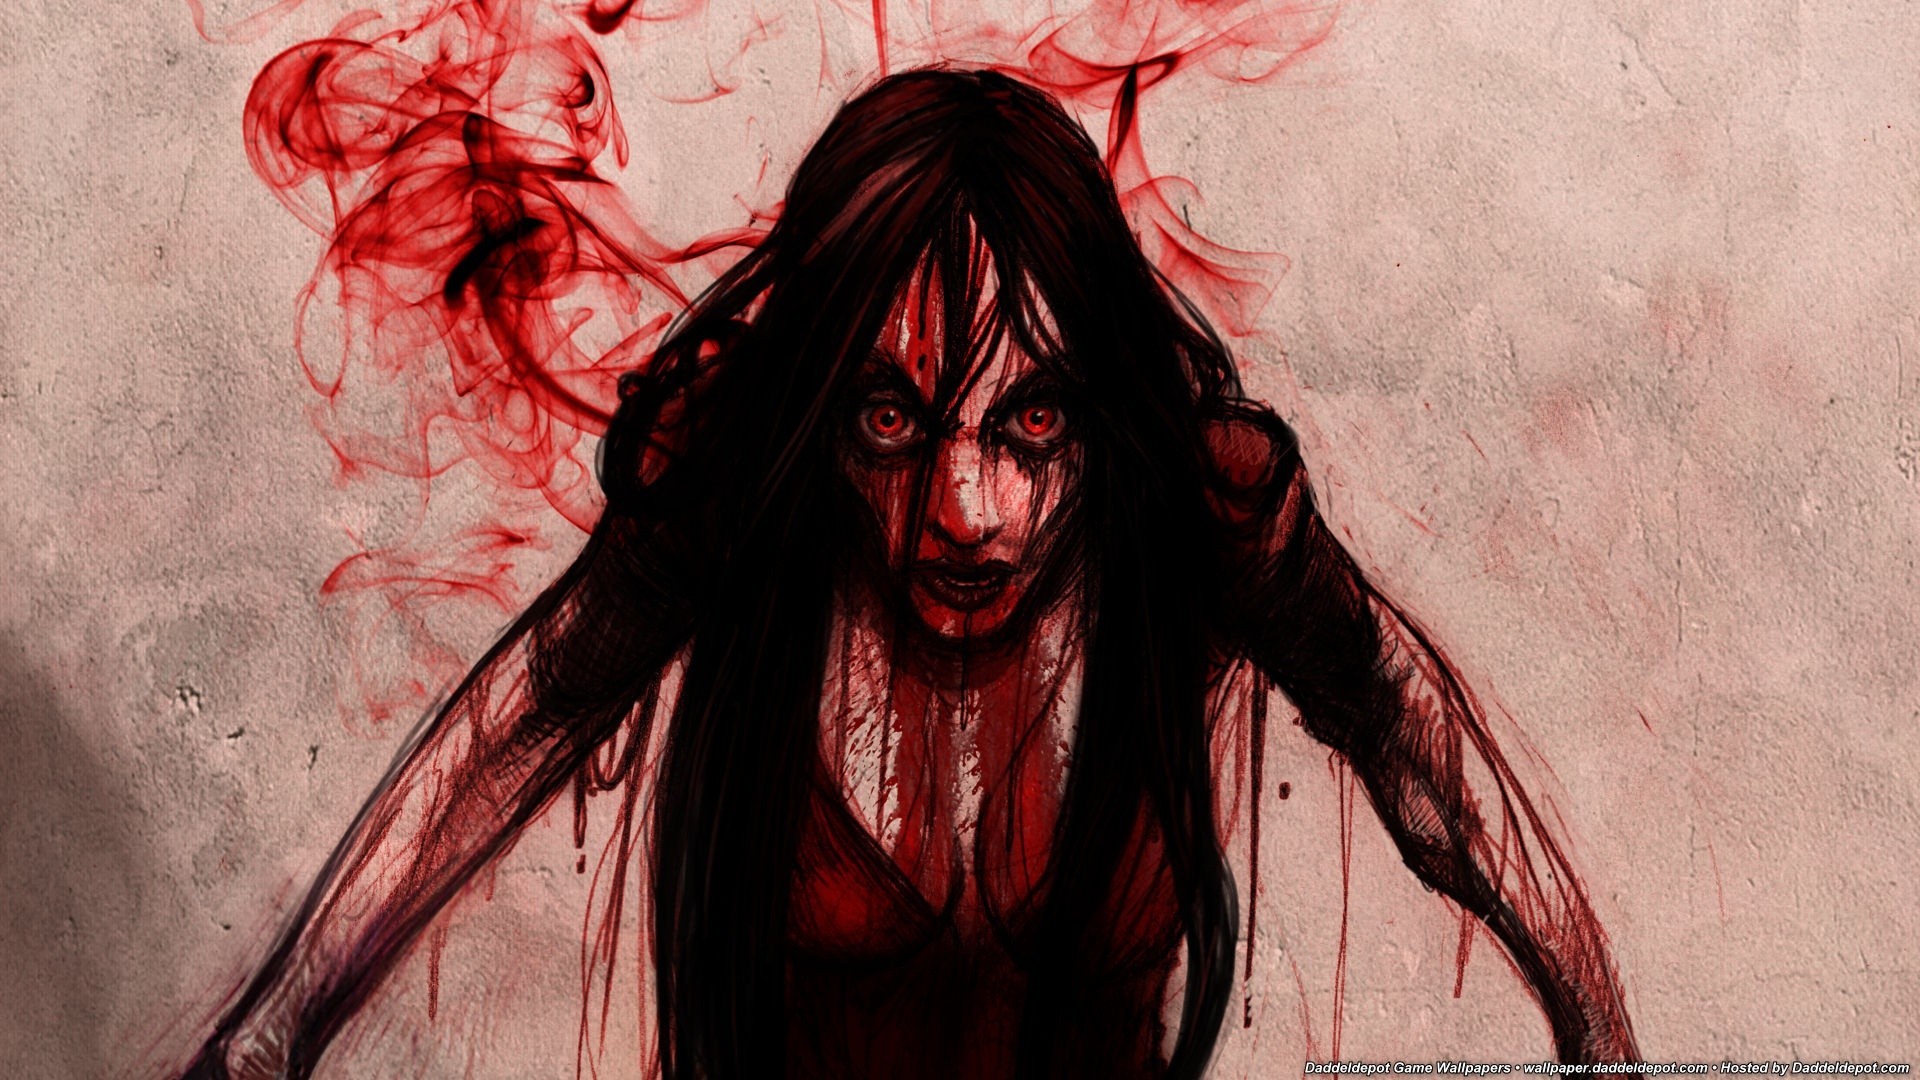 General 1920x1080 witch horror blood redhead artwork red scary face red eyes frontal view